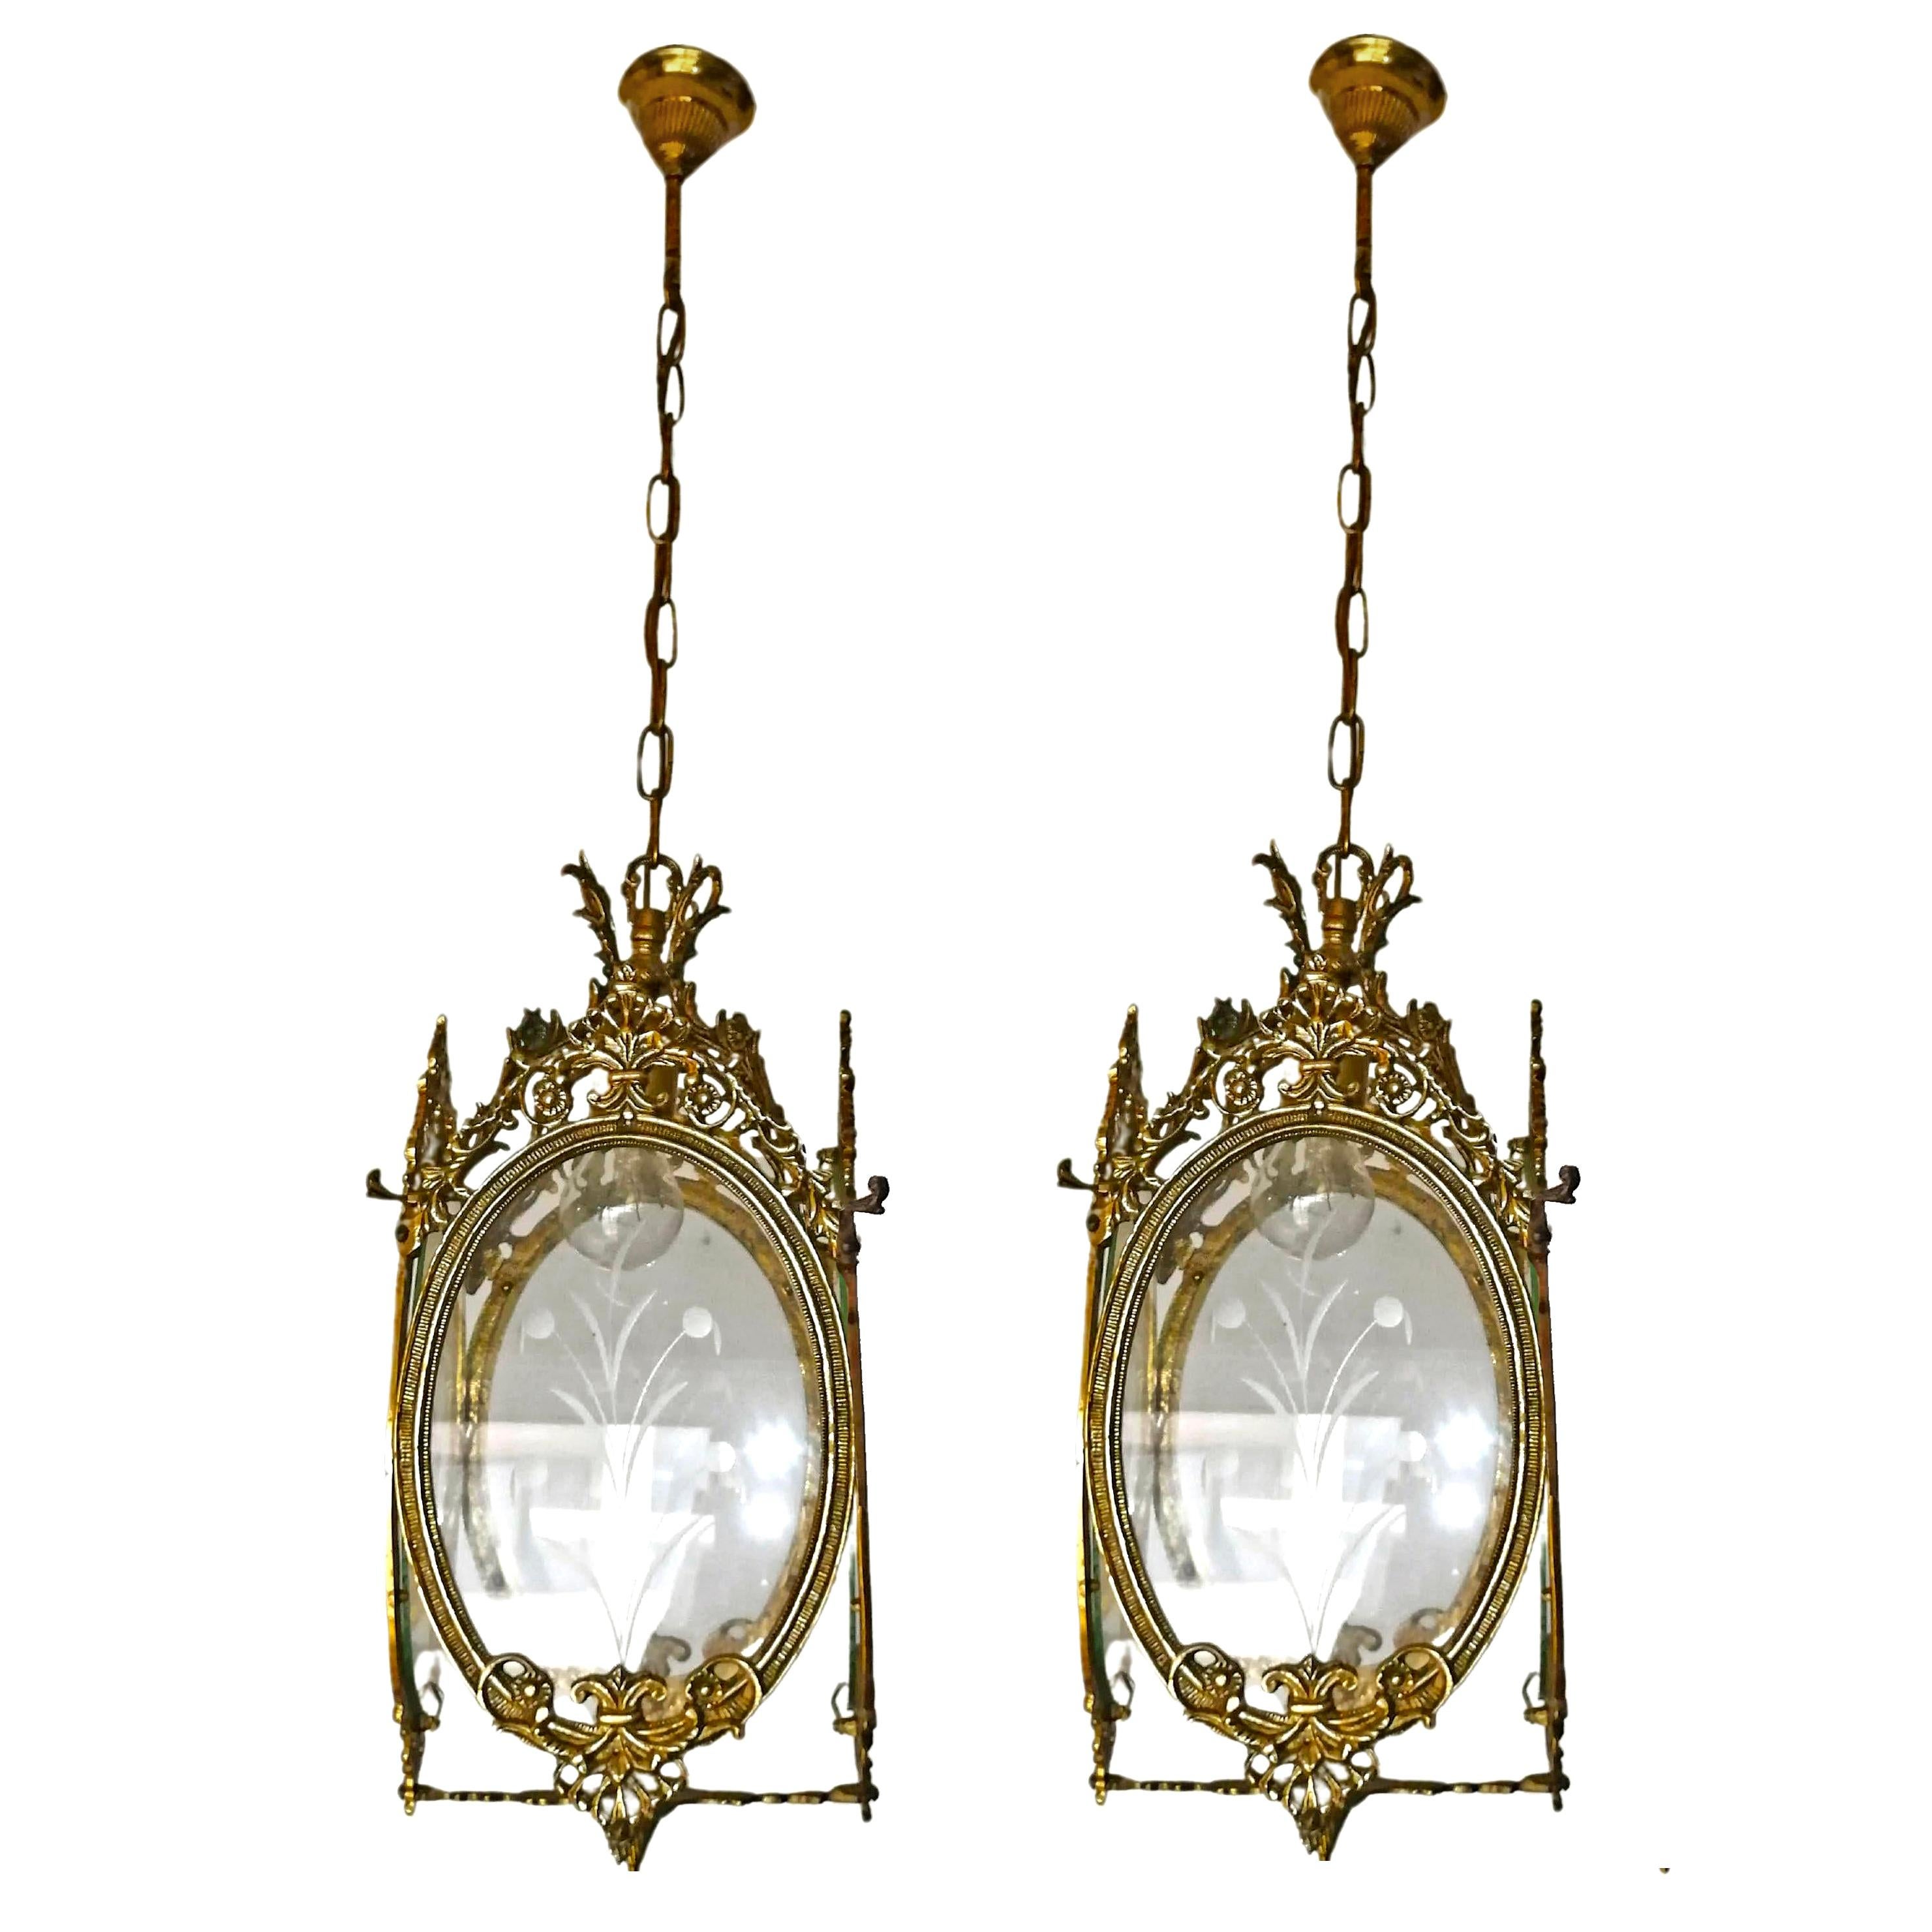 Pair of Antique Louis XVI French Lanterns Chandeliers in Gilt Bronze & Cut Glass For Sale 1